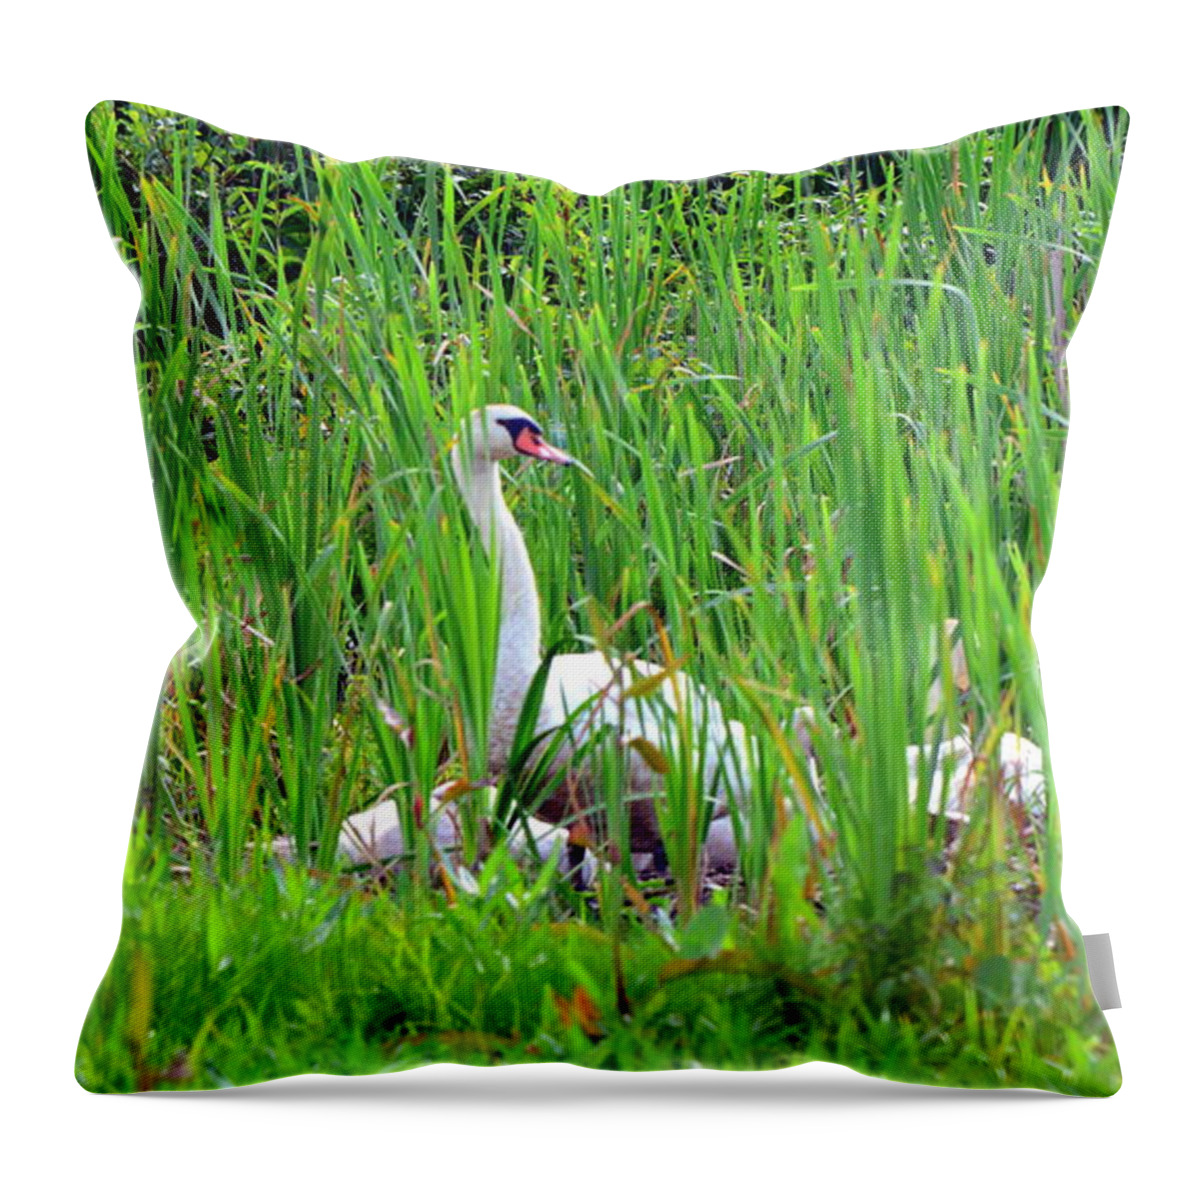 Swans' In Hiding Throw Pillow featuring the photograph Swans' In Hiding by Lisa Wooten